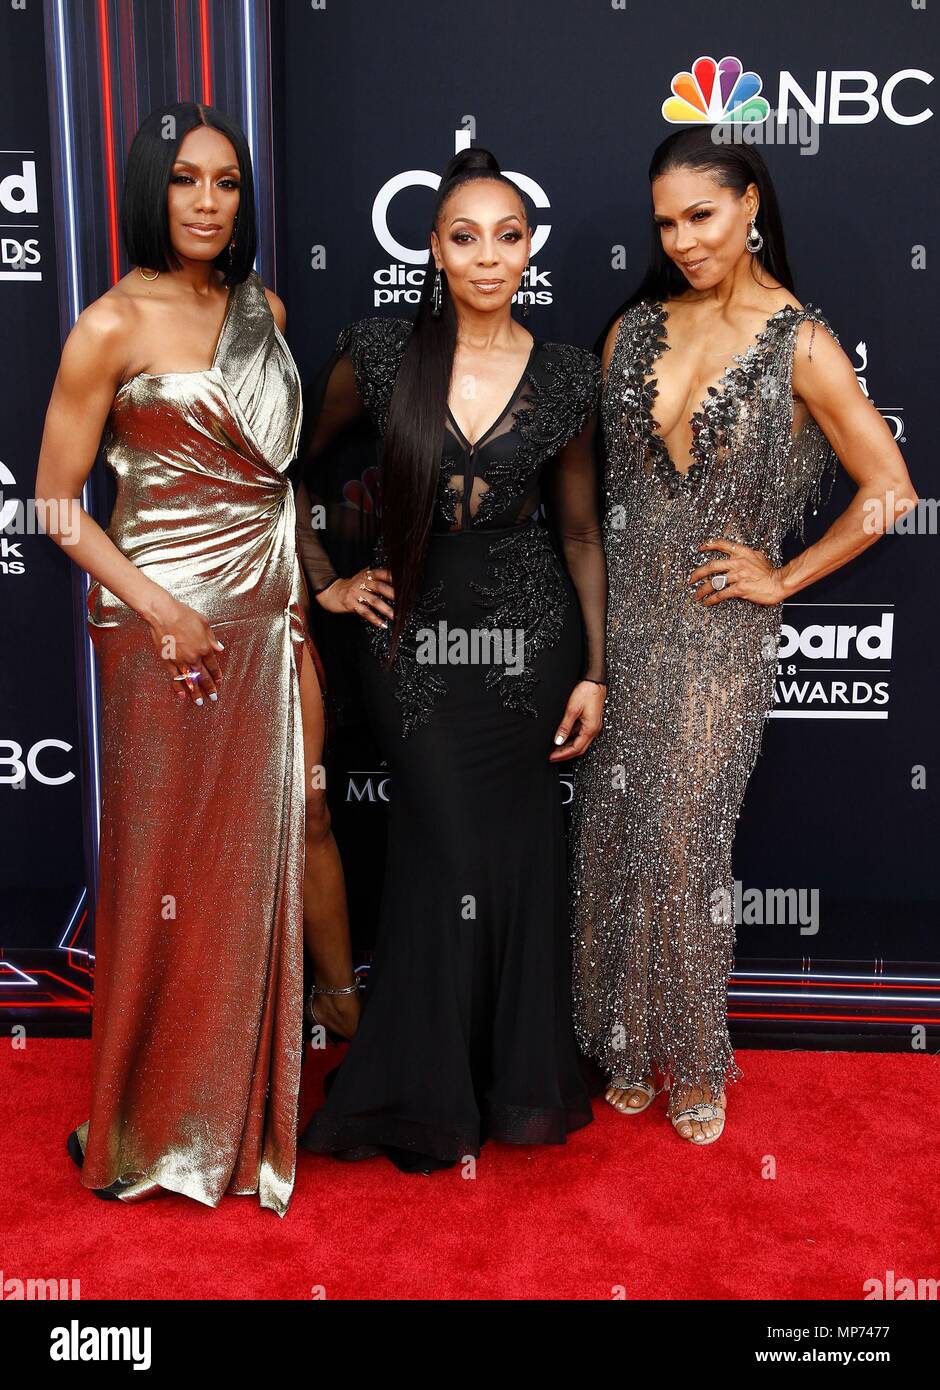 Las Vegas, NV, USA. 20th May, 2018. Rhona Bennett, Terry Ellis, and Cindy Herron of En Vogue at arrivals for 2018 Billboard Music Awards - Part 2, MGM Grand Garden Arena, Las Vegas, NV May 20, 2018. Credit: JA/Everett Collection/Alamy Live News Stock Photo